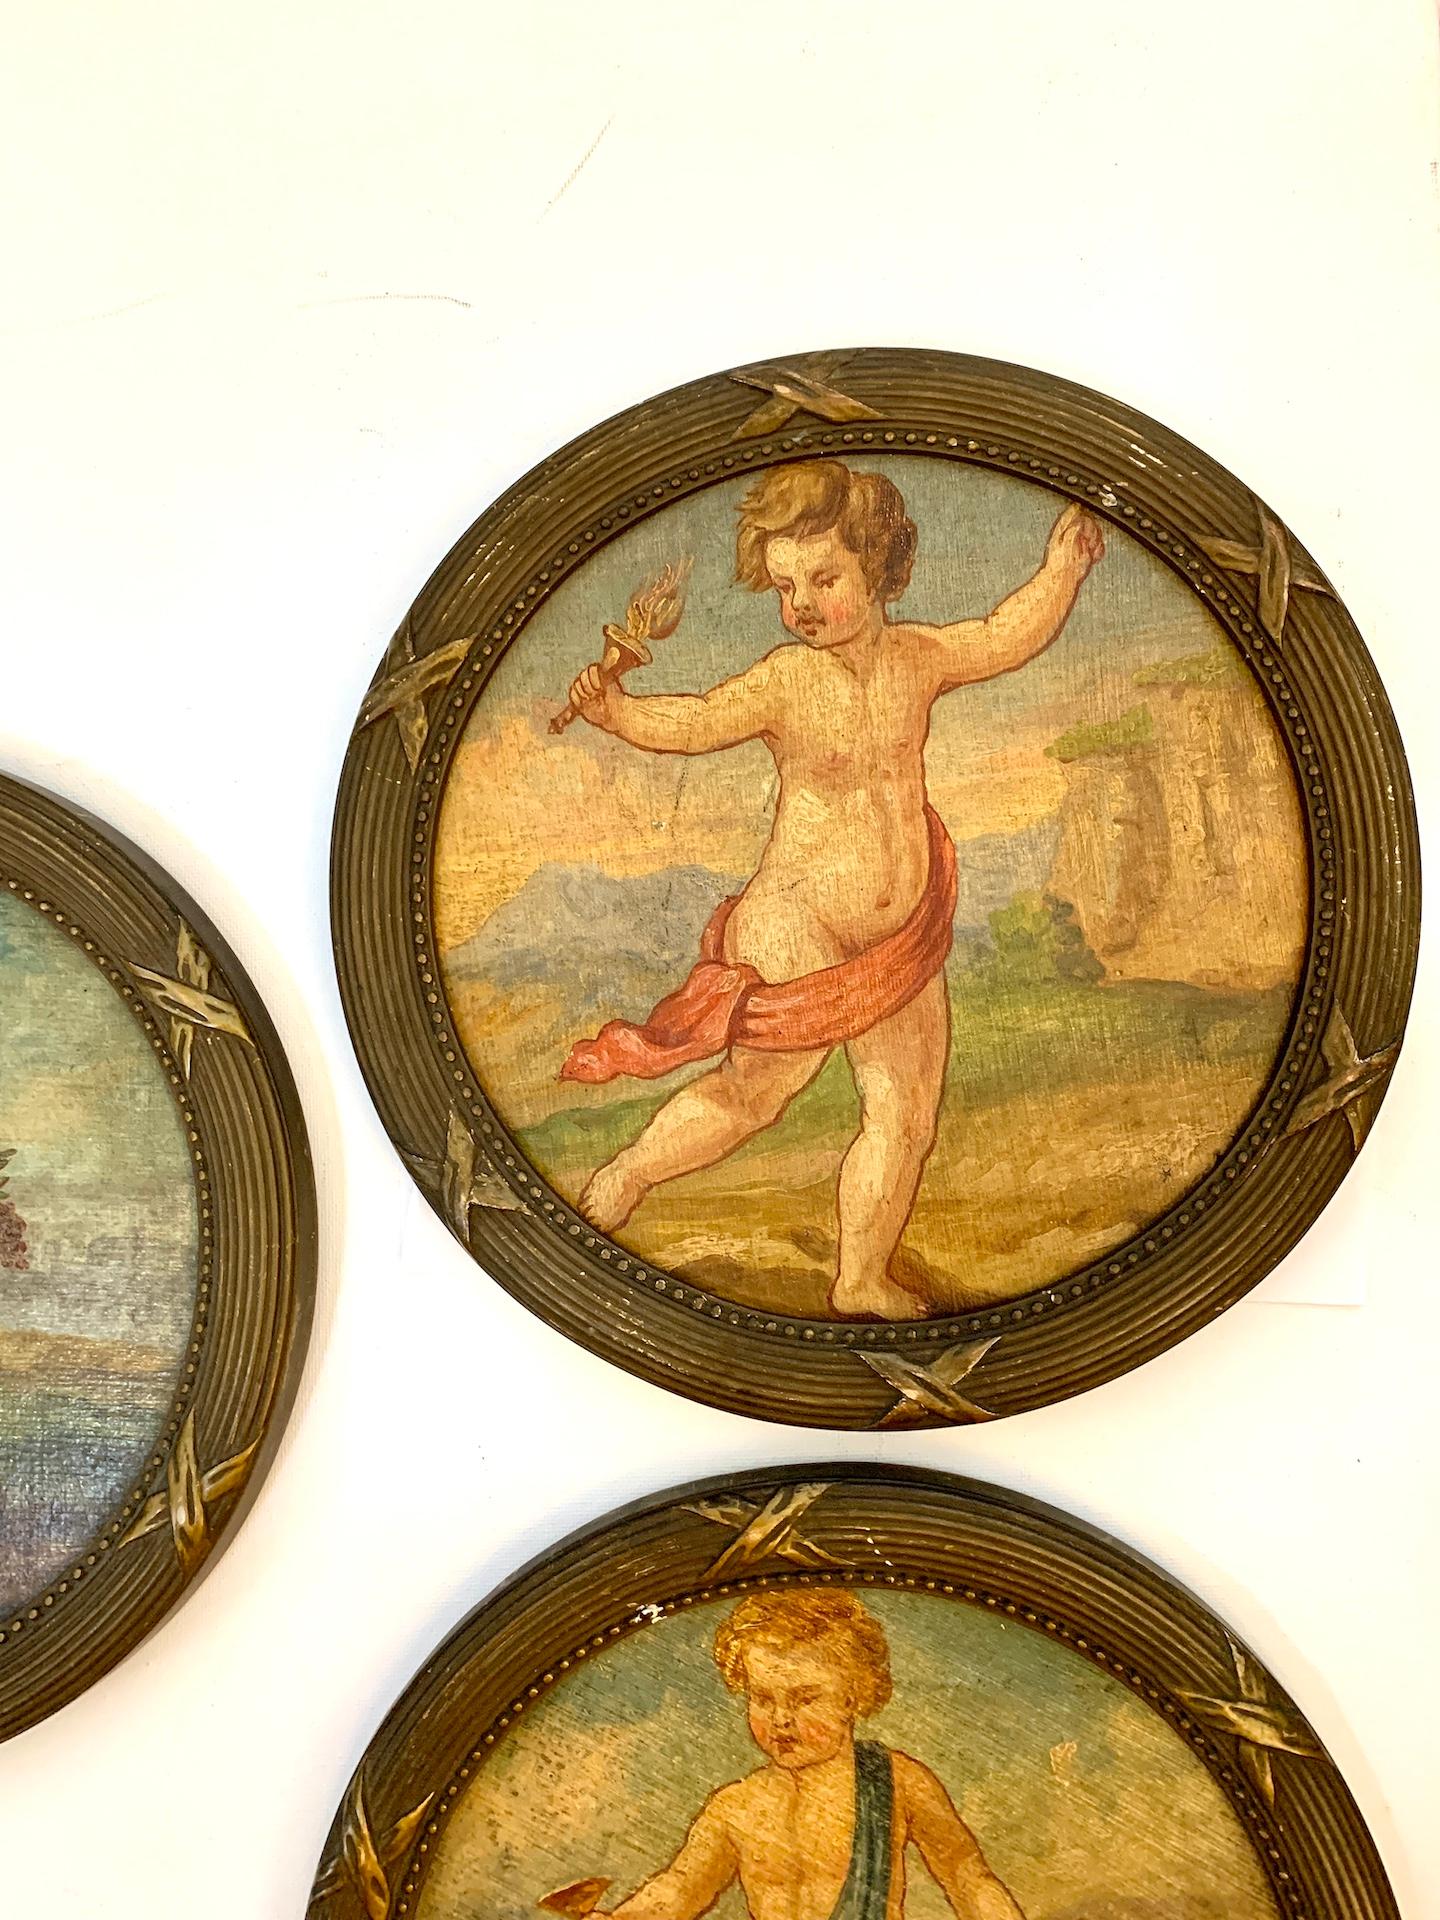 Set of Five late 19th century Italian or French portraits of Putti or Angels

A unique set of five oils on board depicting either Cherubs or Putti, all still framed in their original frames.

The style is very much in the Italian or French 17th